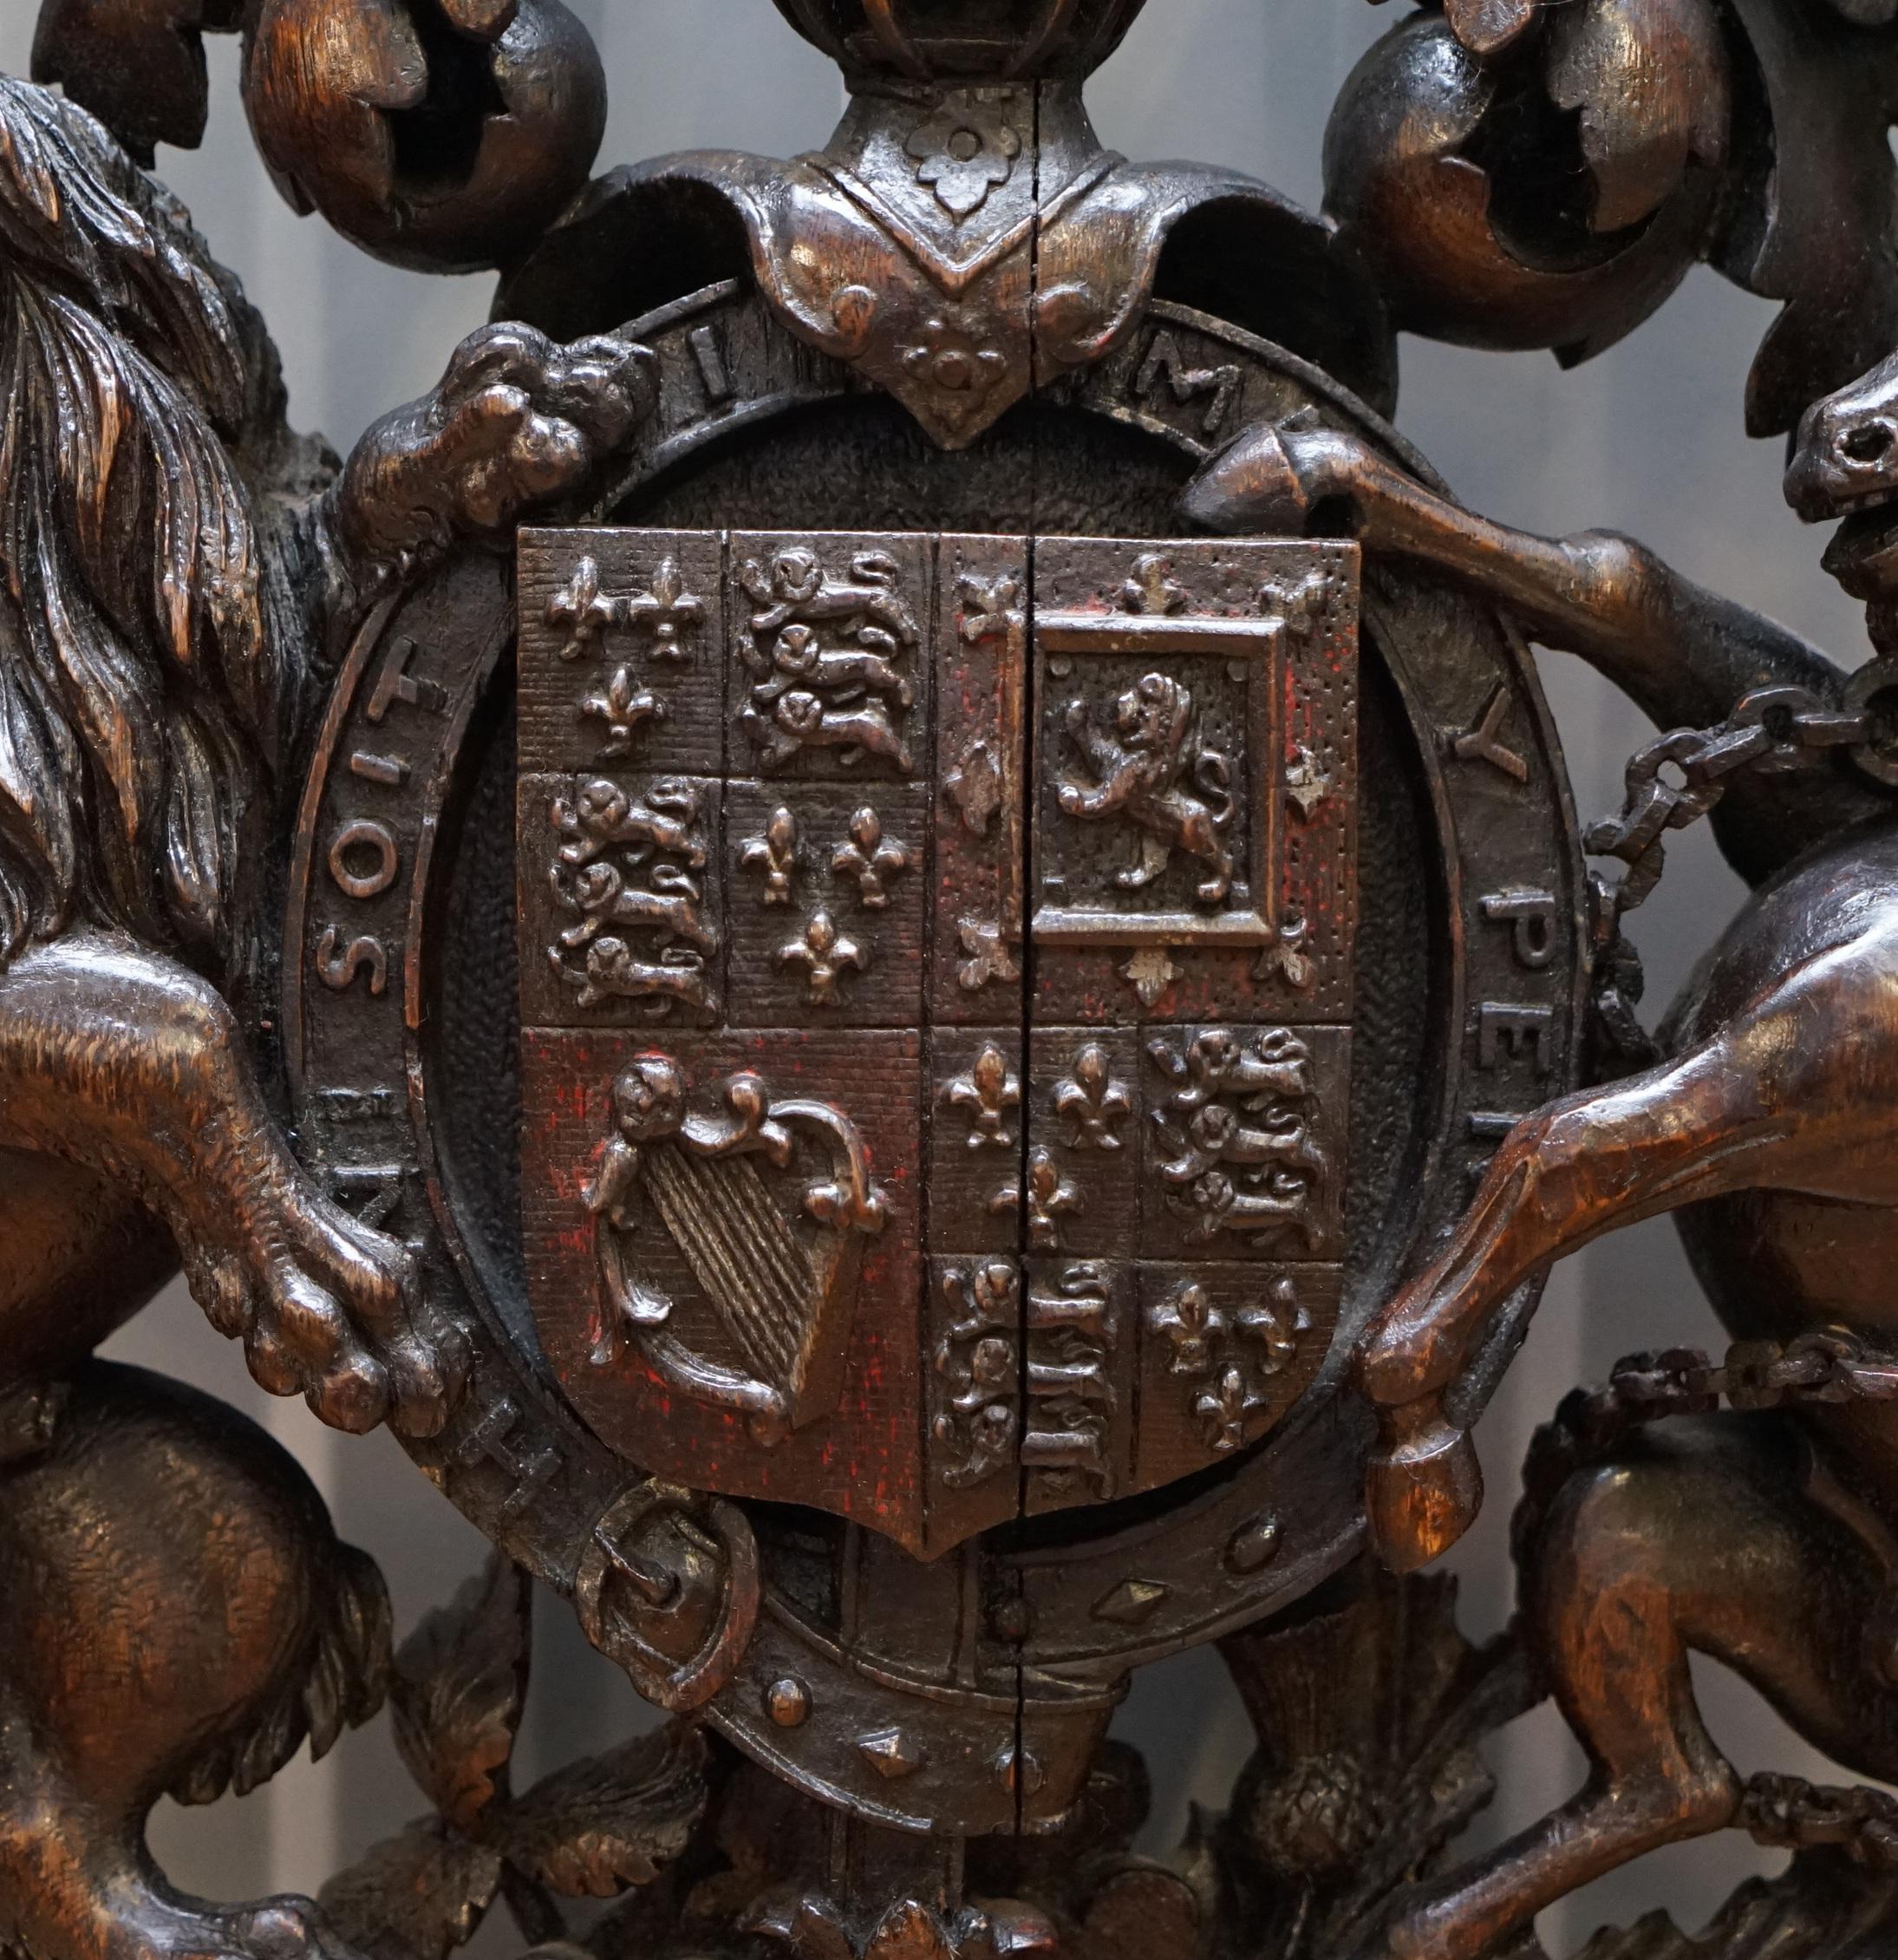 Hand-Carved Hand Carved Charles II English Royal Coat of Arms 1660-1685 Armorial Crest